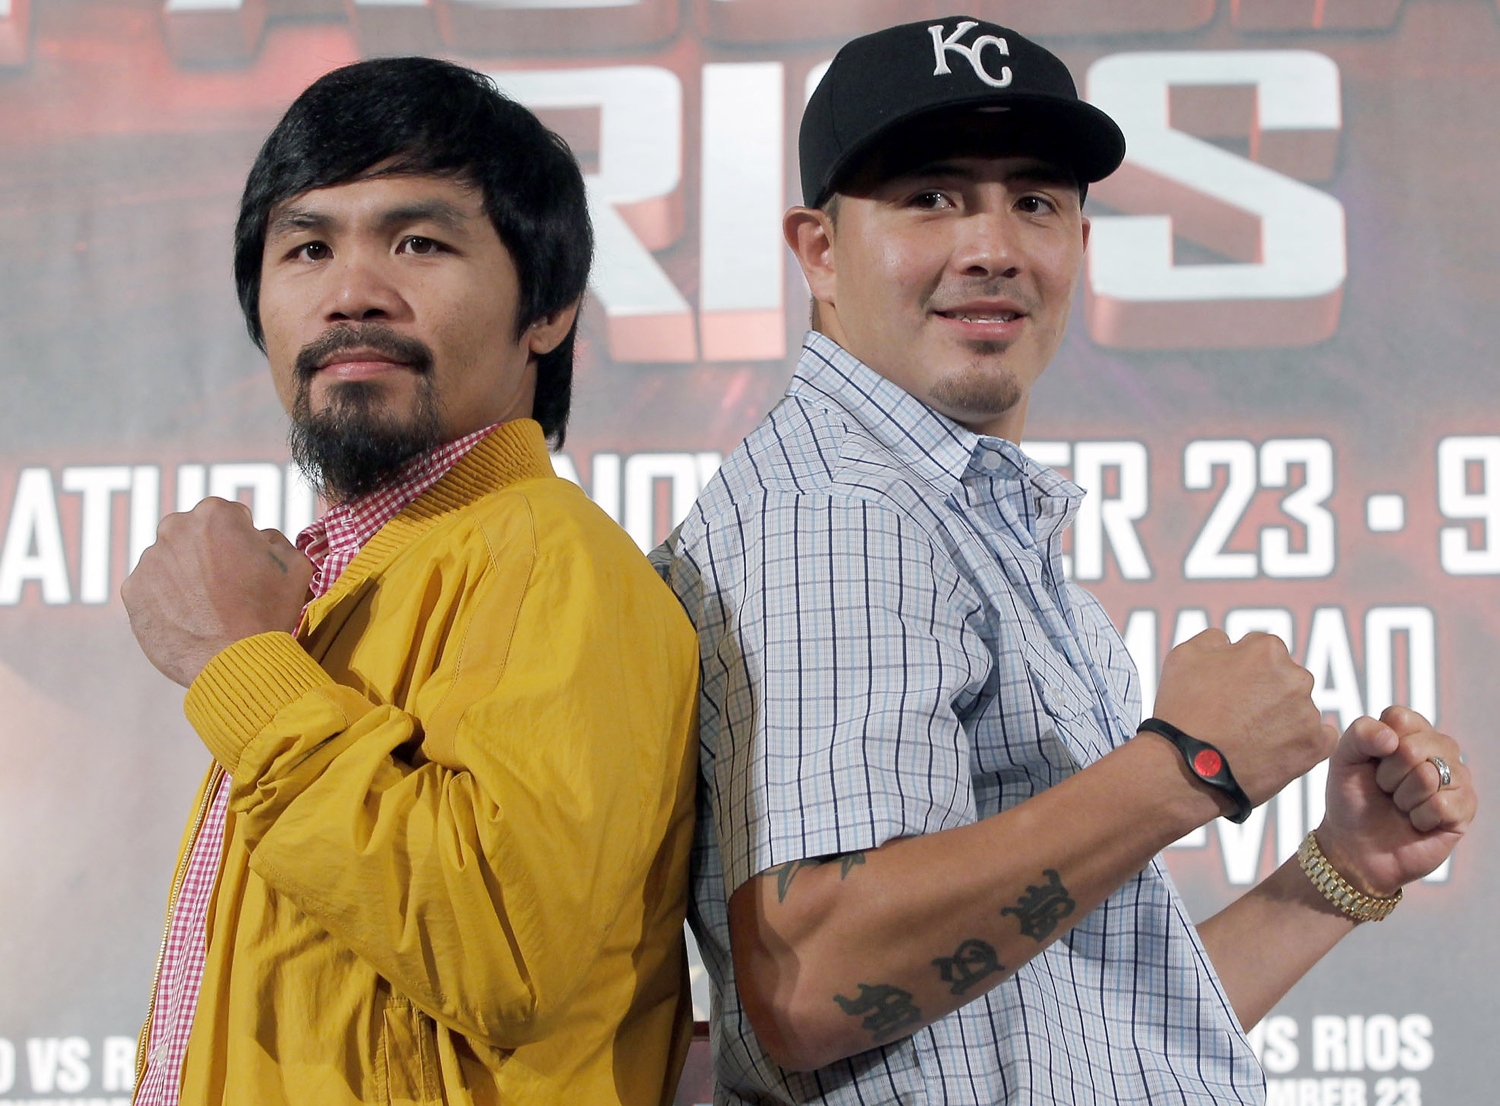 Manny Pacquiao (left) of the Philippines, poses with Brandon Rios at a news conference in Beverly Hills, California. Photo: AP